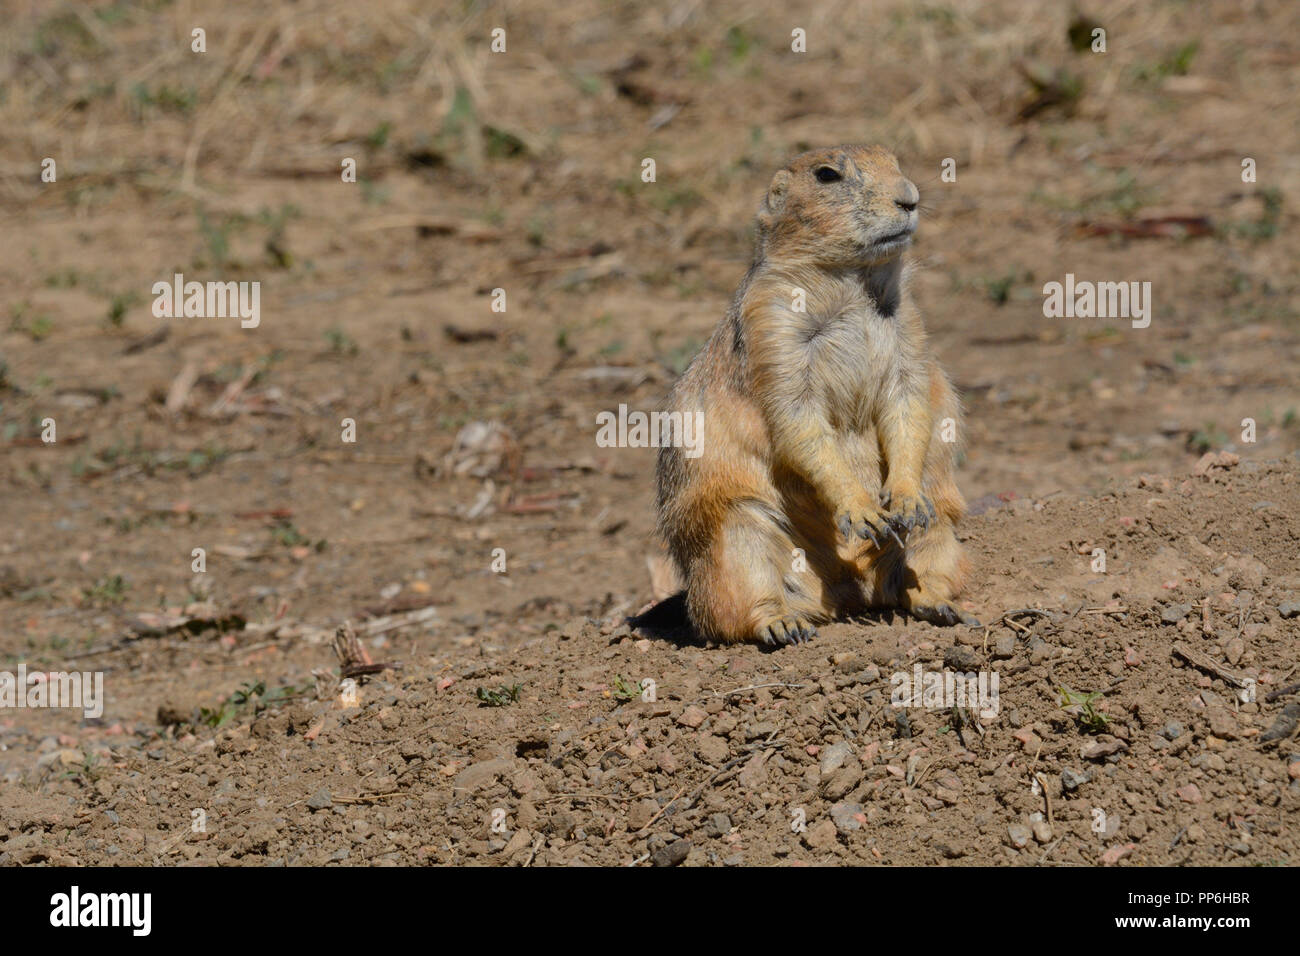 Alert Black-tailed prairie dog or Cynomys ludovicianus sitting up on hind legs in dirt field Stock Photo